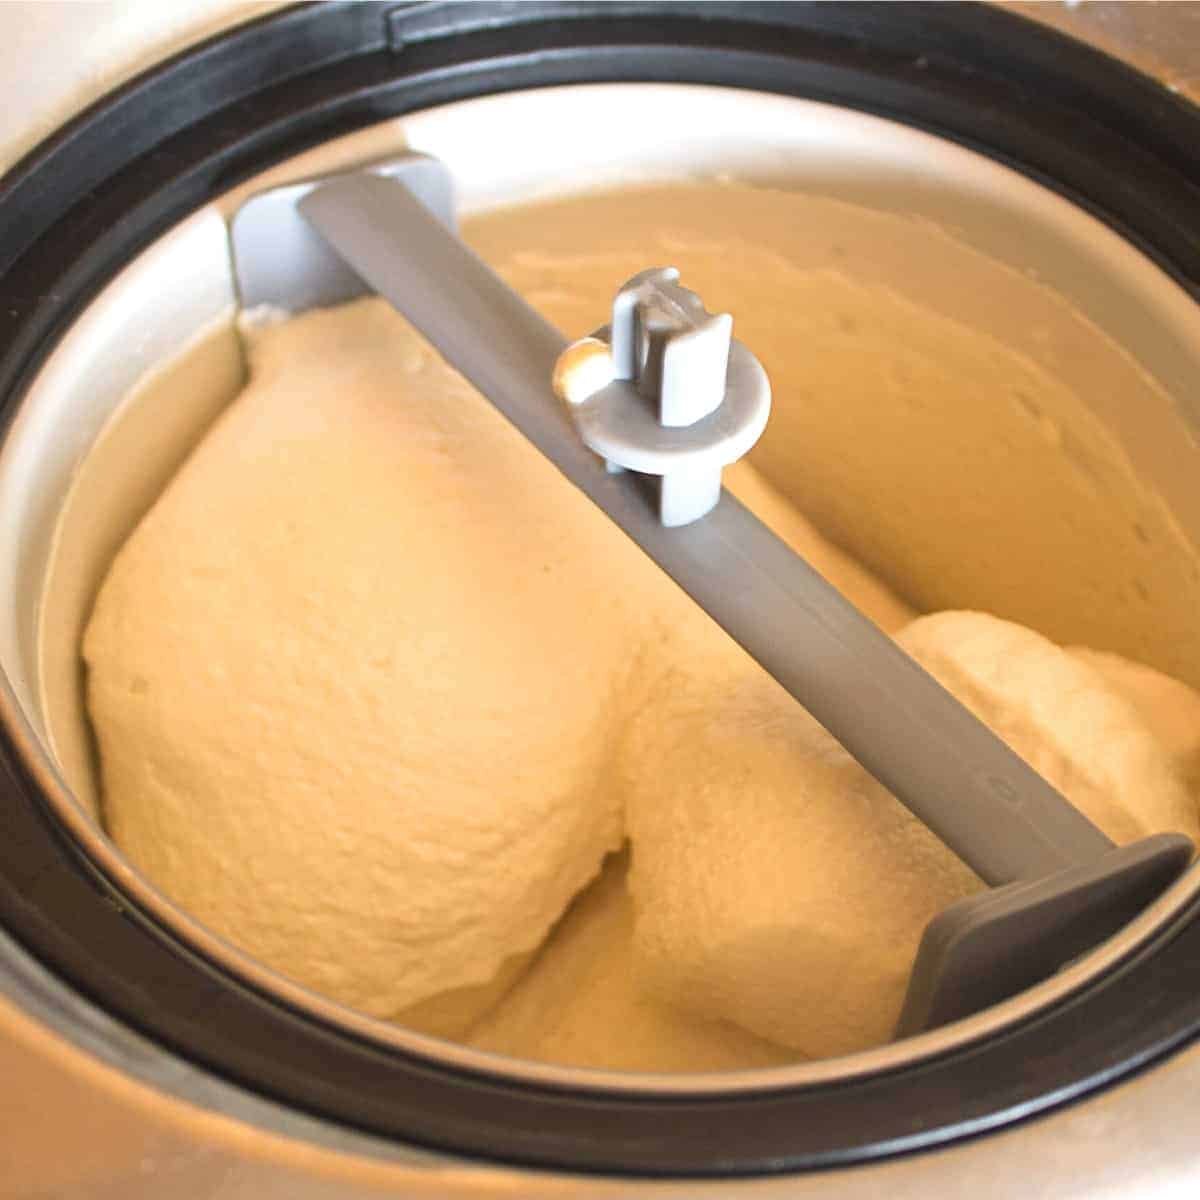 churning the peach ice cream without eggs